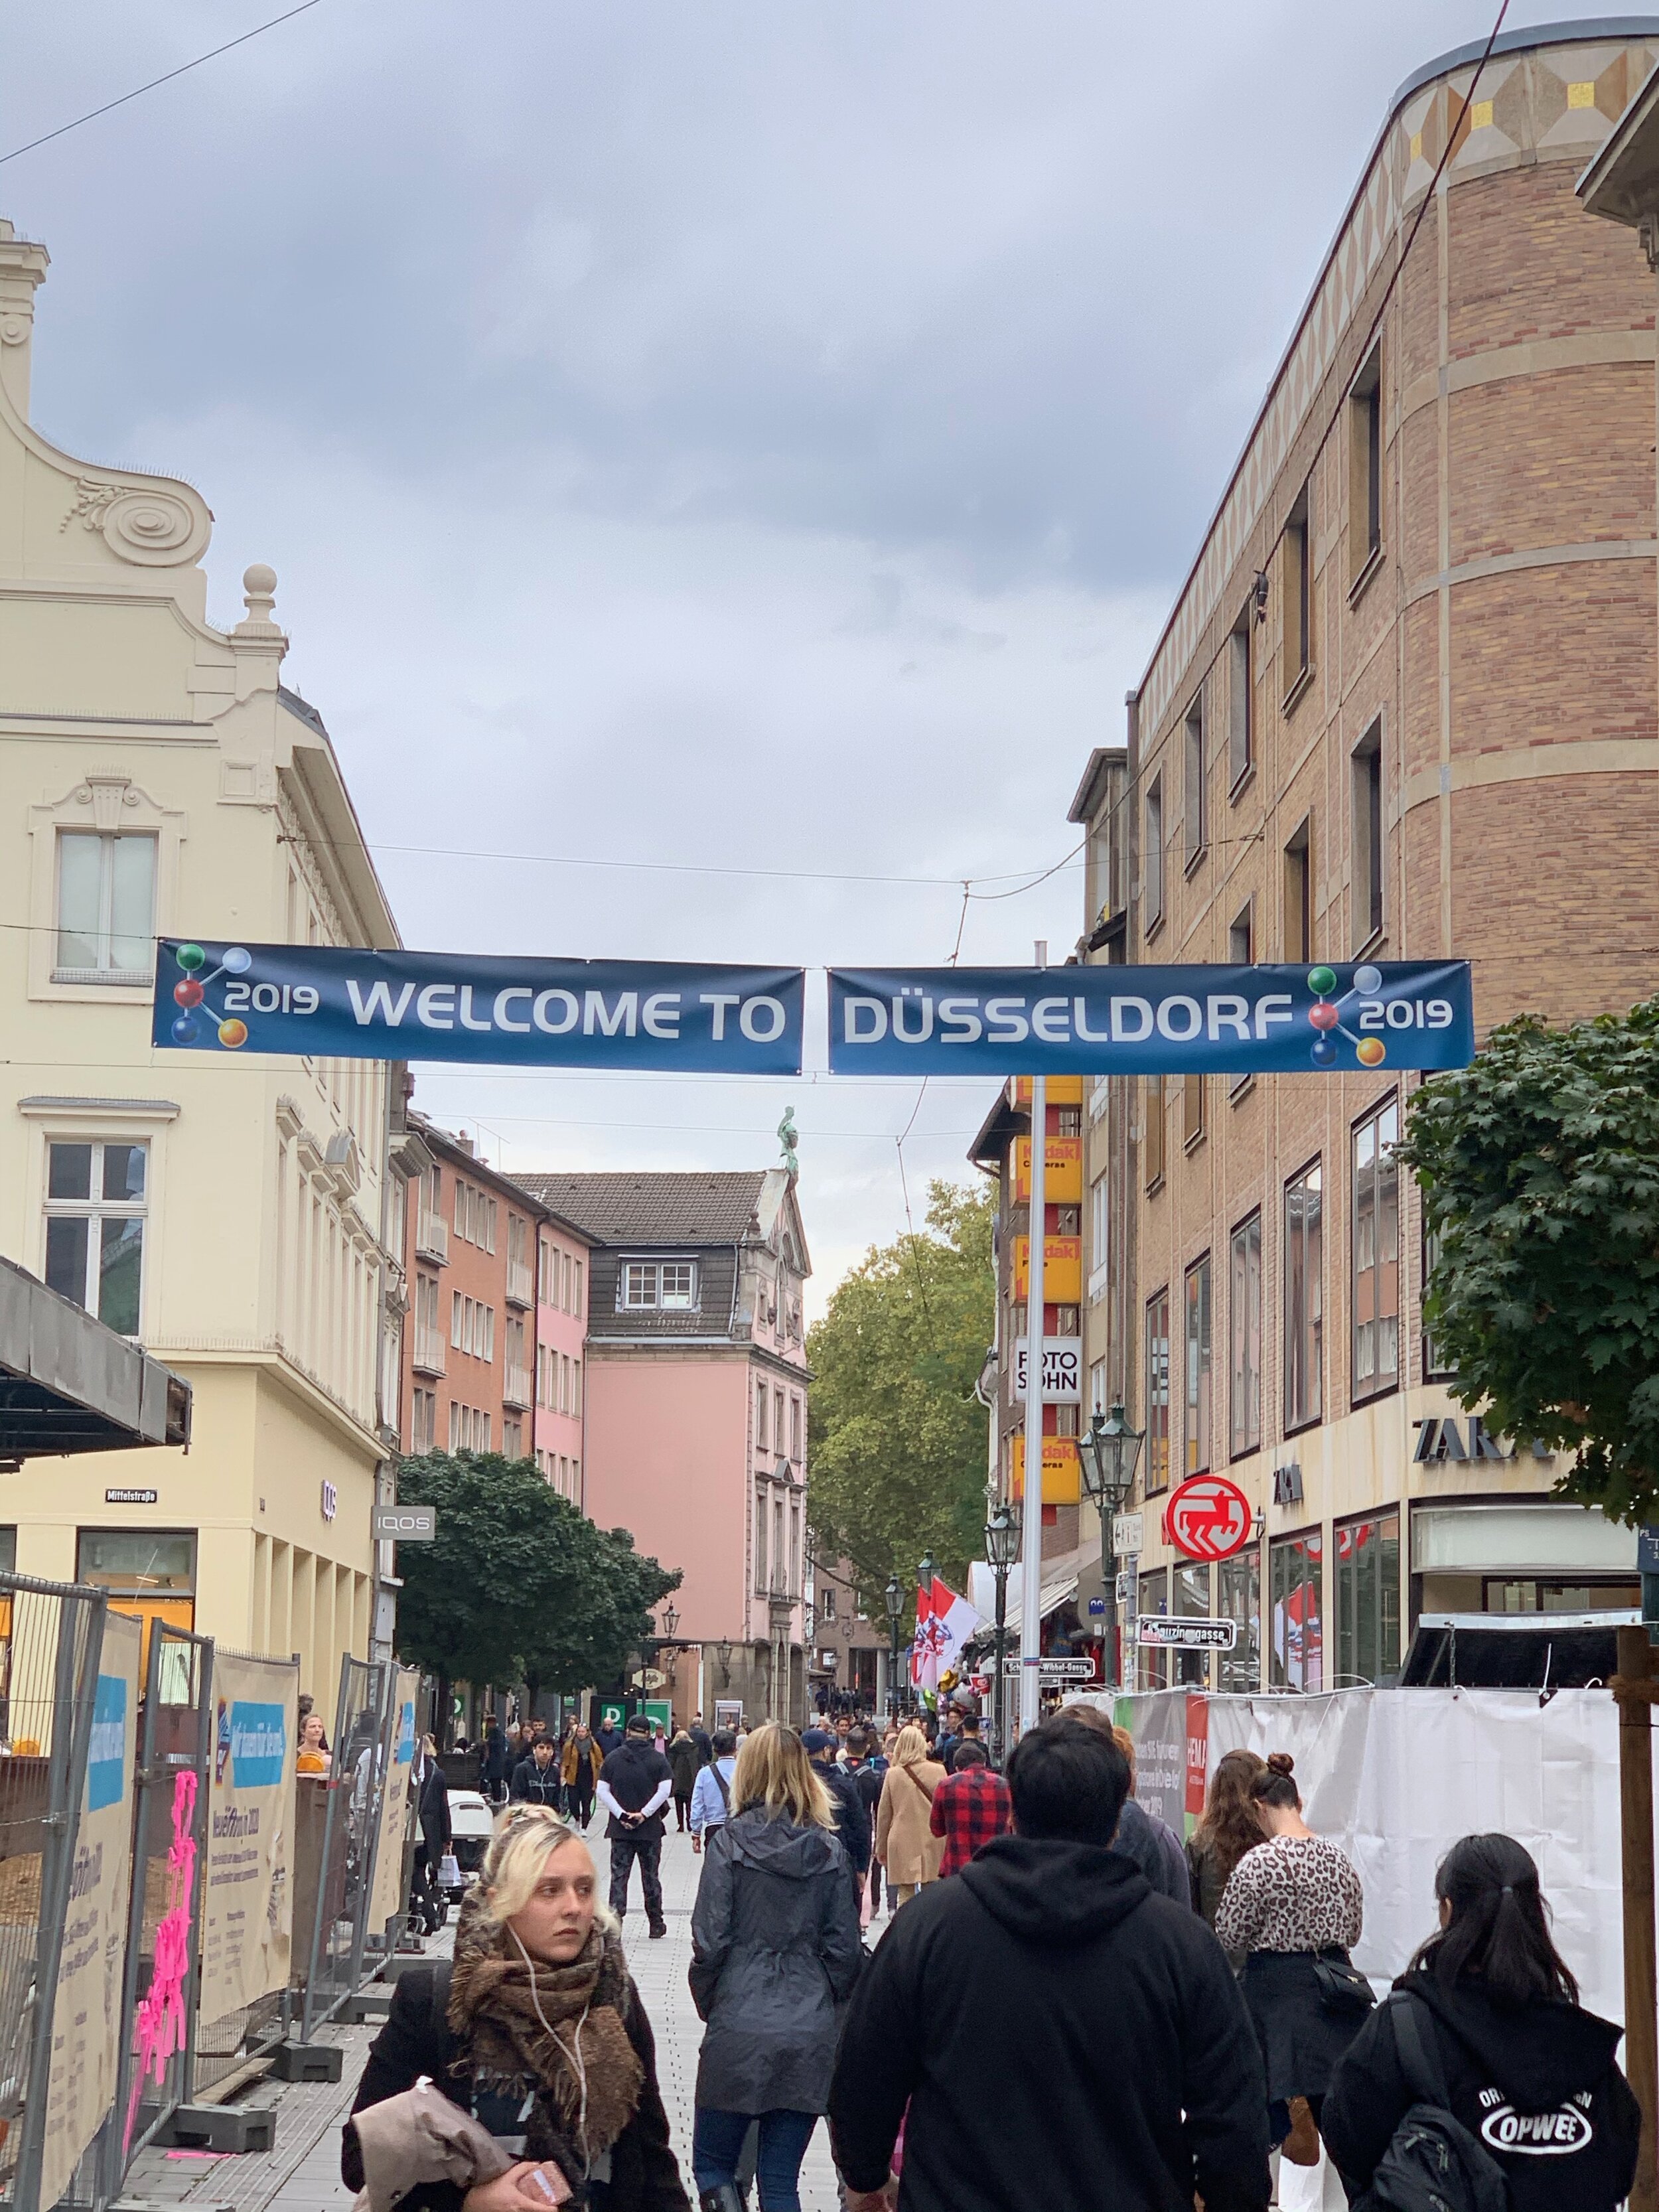   Dusseldorf once again welcomed the global plastics industry for the triennial K fair!  